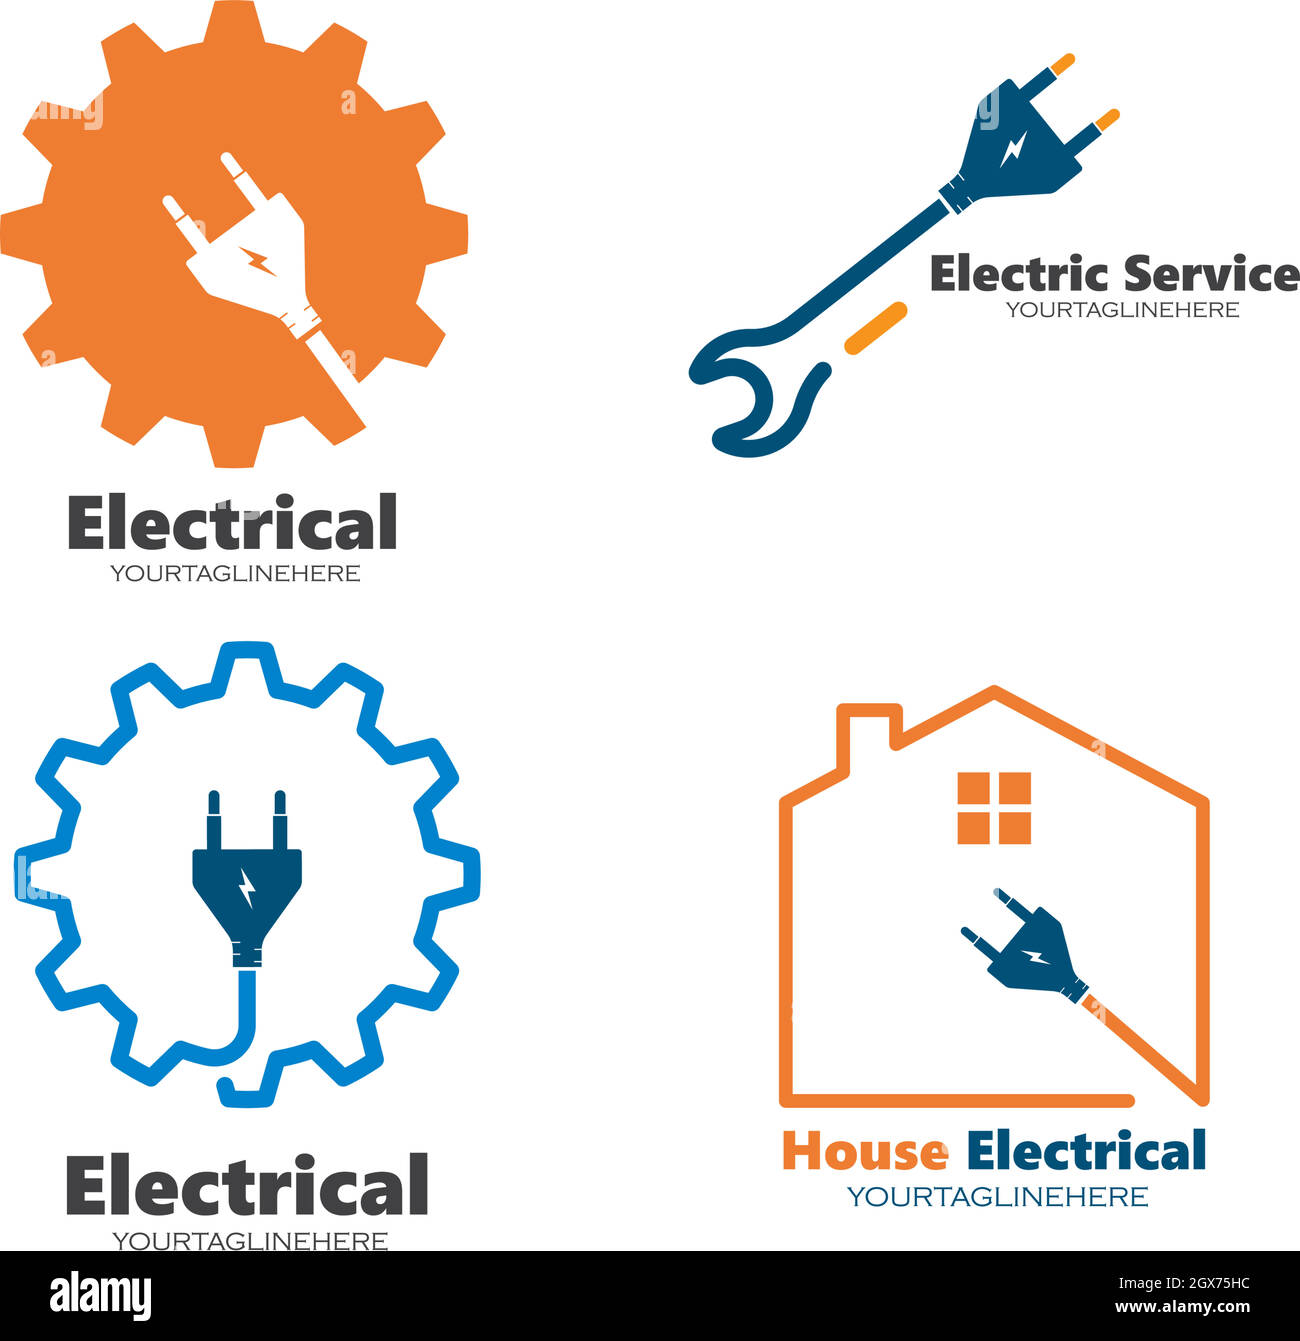 electrical-service-and-installation-logo-icon-vector-stock-vector-image